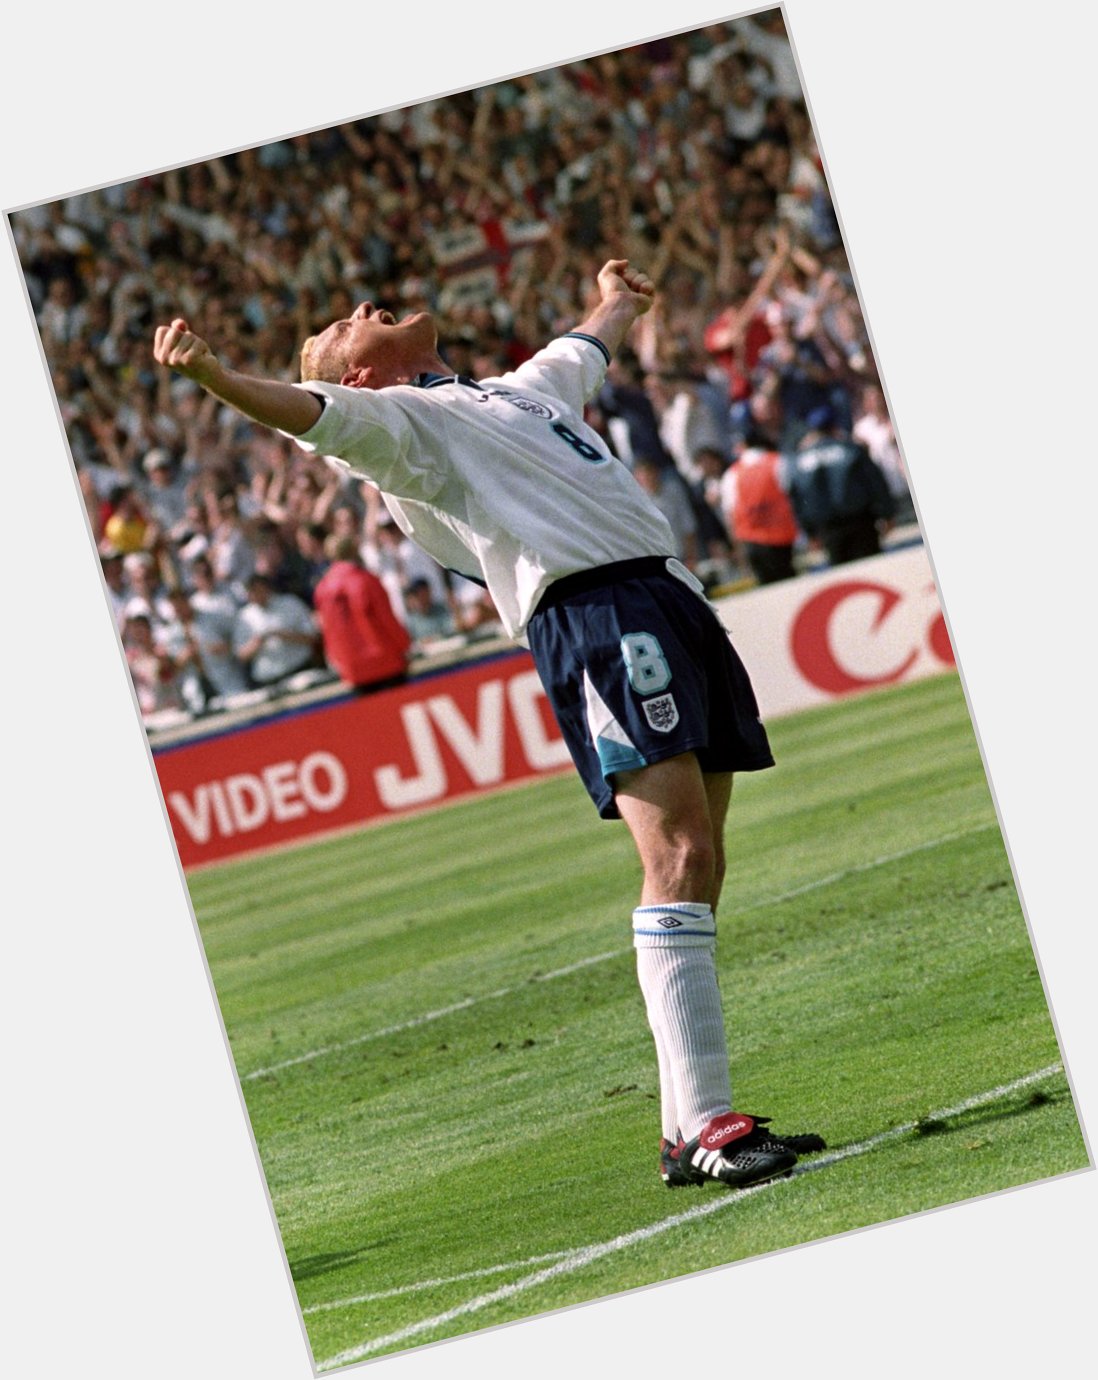 Happy Birthday to Paul Gascoigne - the most naturally gifted player England has ever produced 